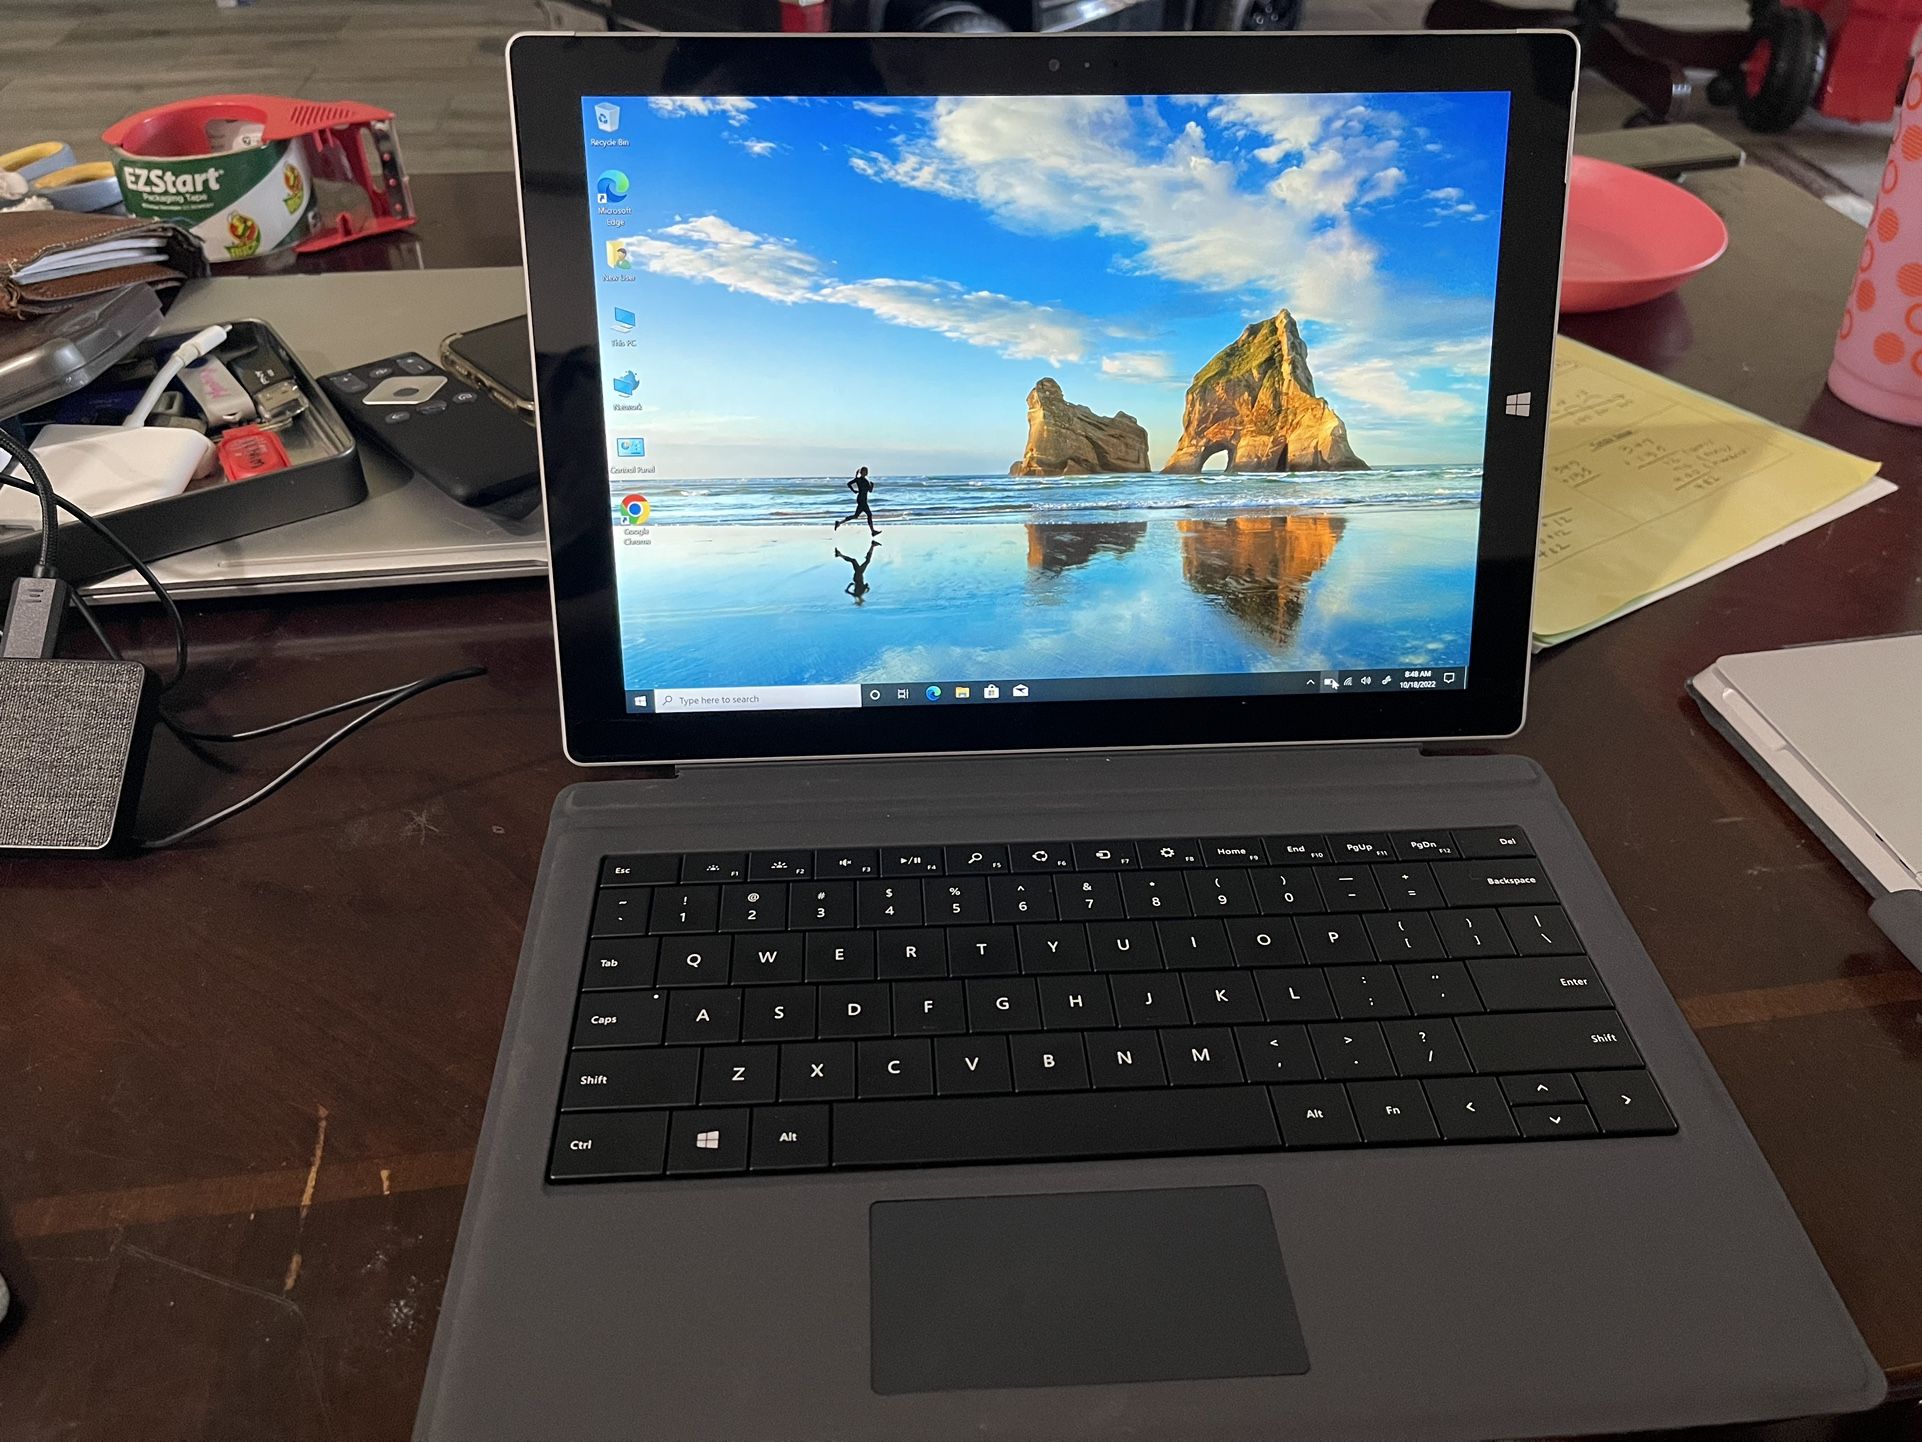 Microsoft Surface Pro 3 Touch screen, Intel Core i5, 8gb Ram , 256gb SSD, Windows 10, Office Package . Good battery back up , light up keyboard, Charg